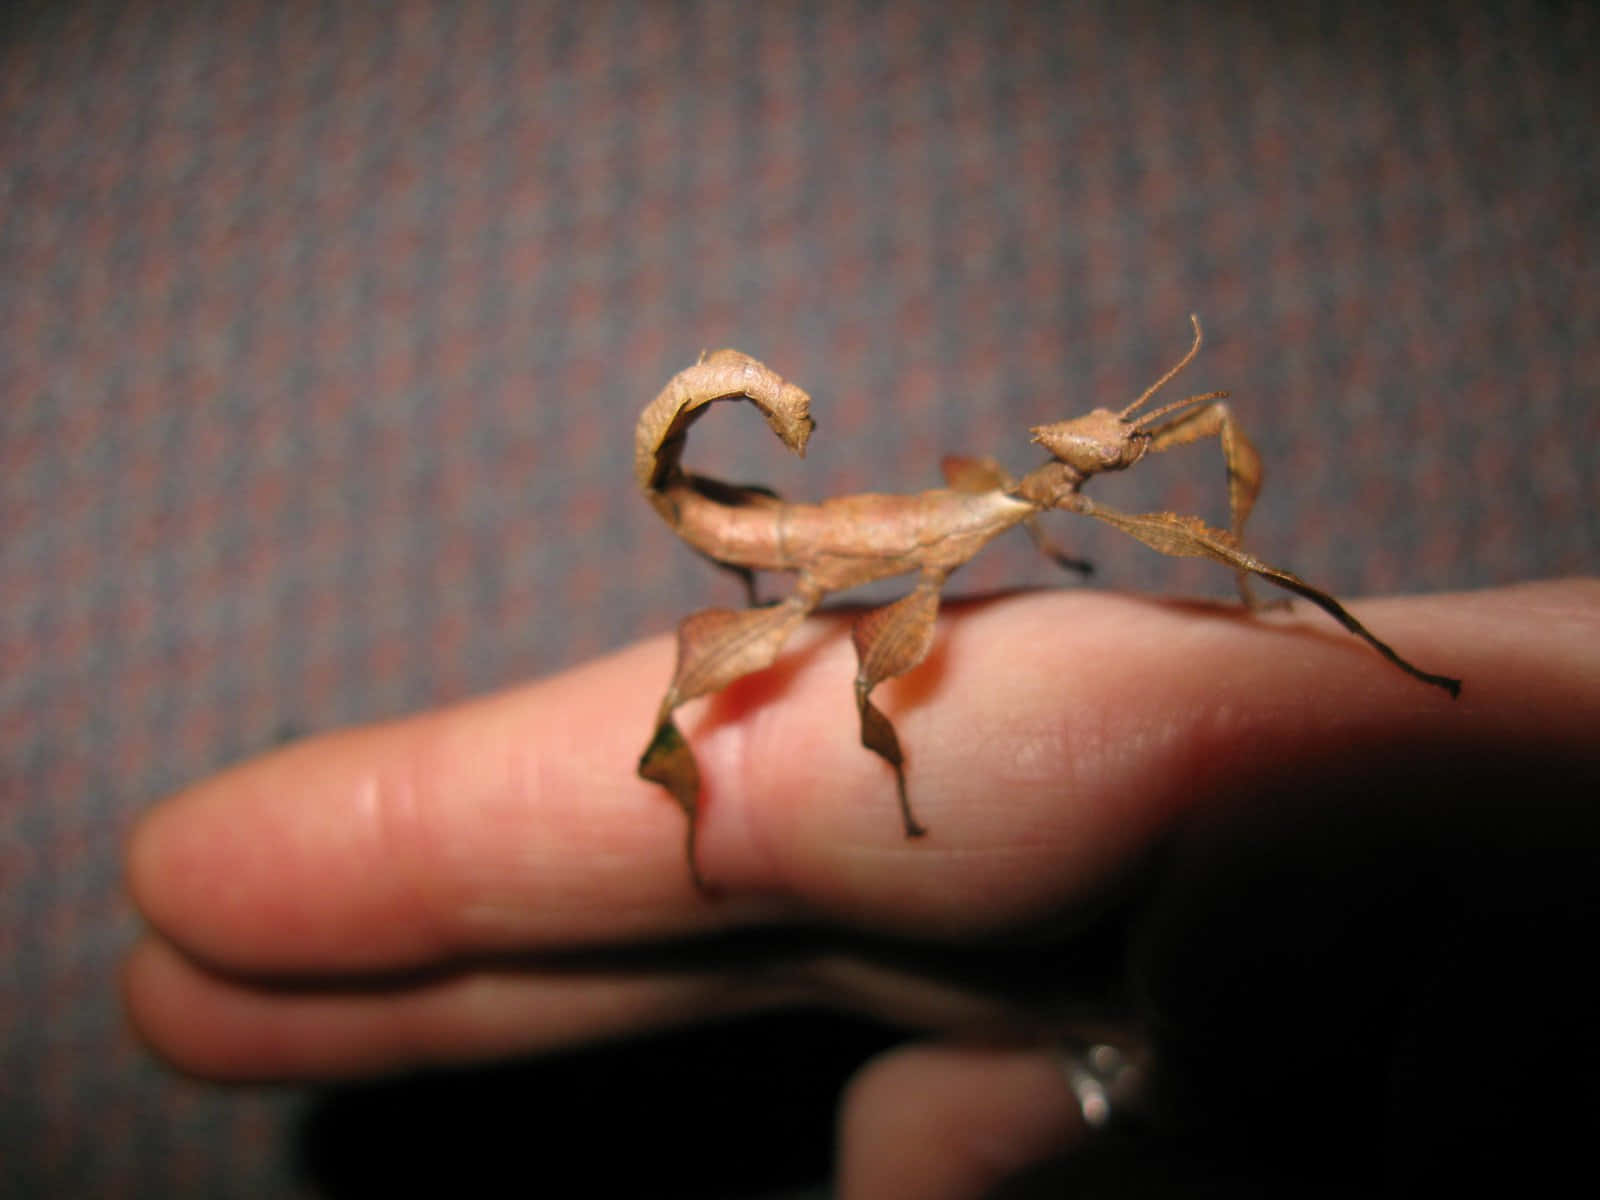 Walkingstick Insect On Human Hand Wallpaper